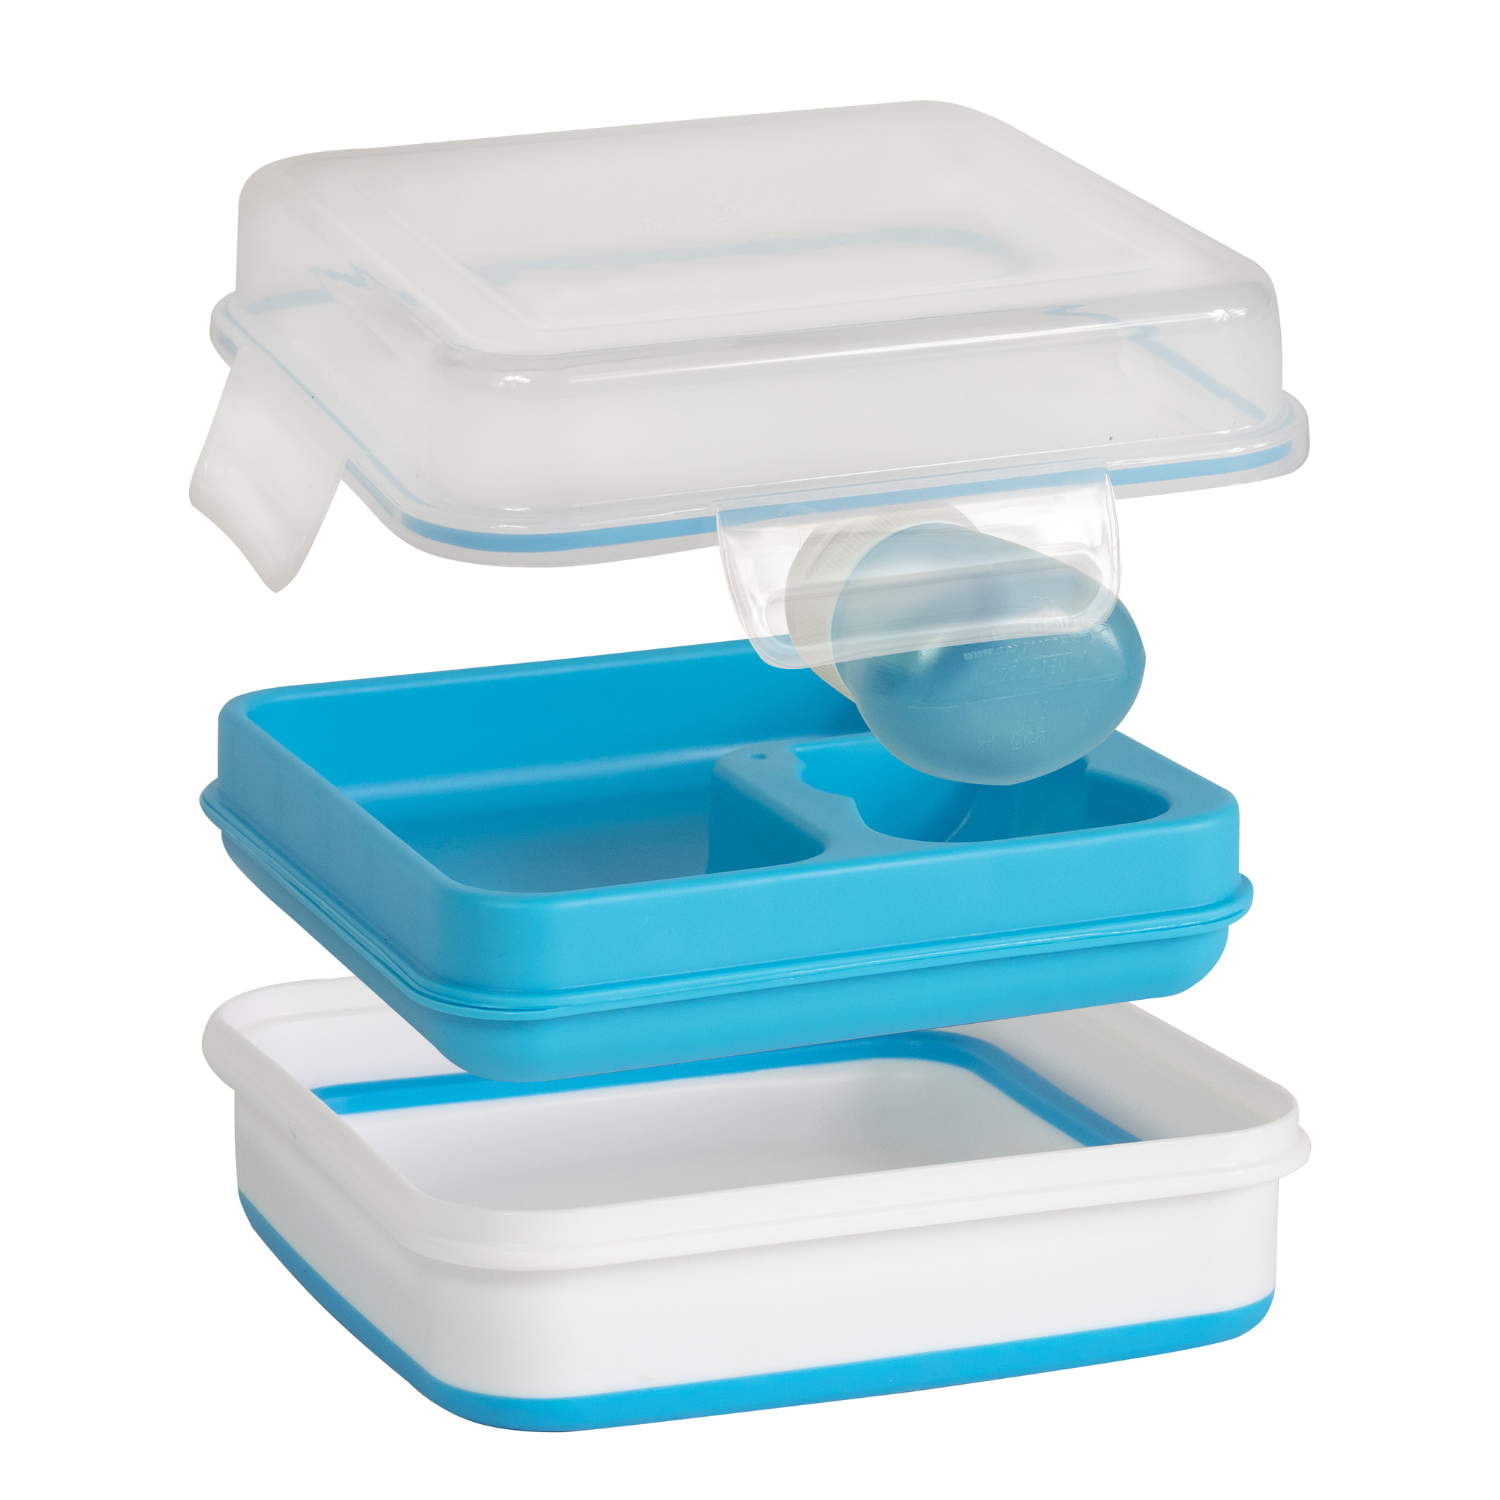 COOL GEAR 2-Pack Large Expandable To-Go Salad Kit Lunch Containers - Rectangle & Square - 52 oz Bowl with 3 Compartments for Salad Toppings and 2 oz Salad Dressing Bottle | Leakproof, Bento Meal P - image 1 of 3